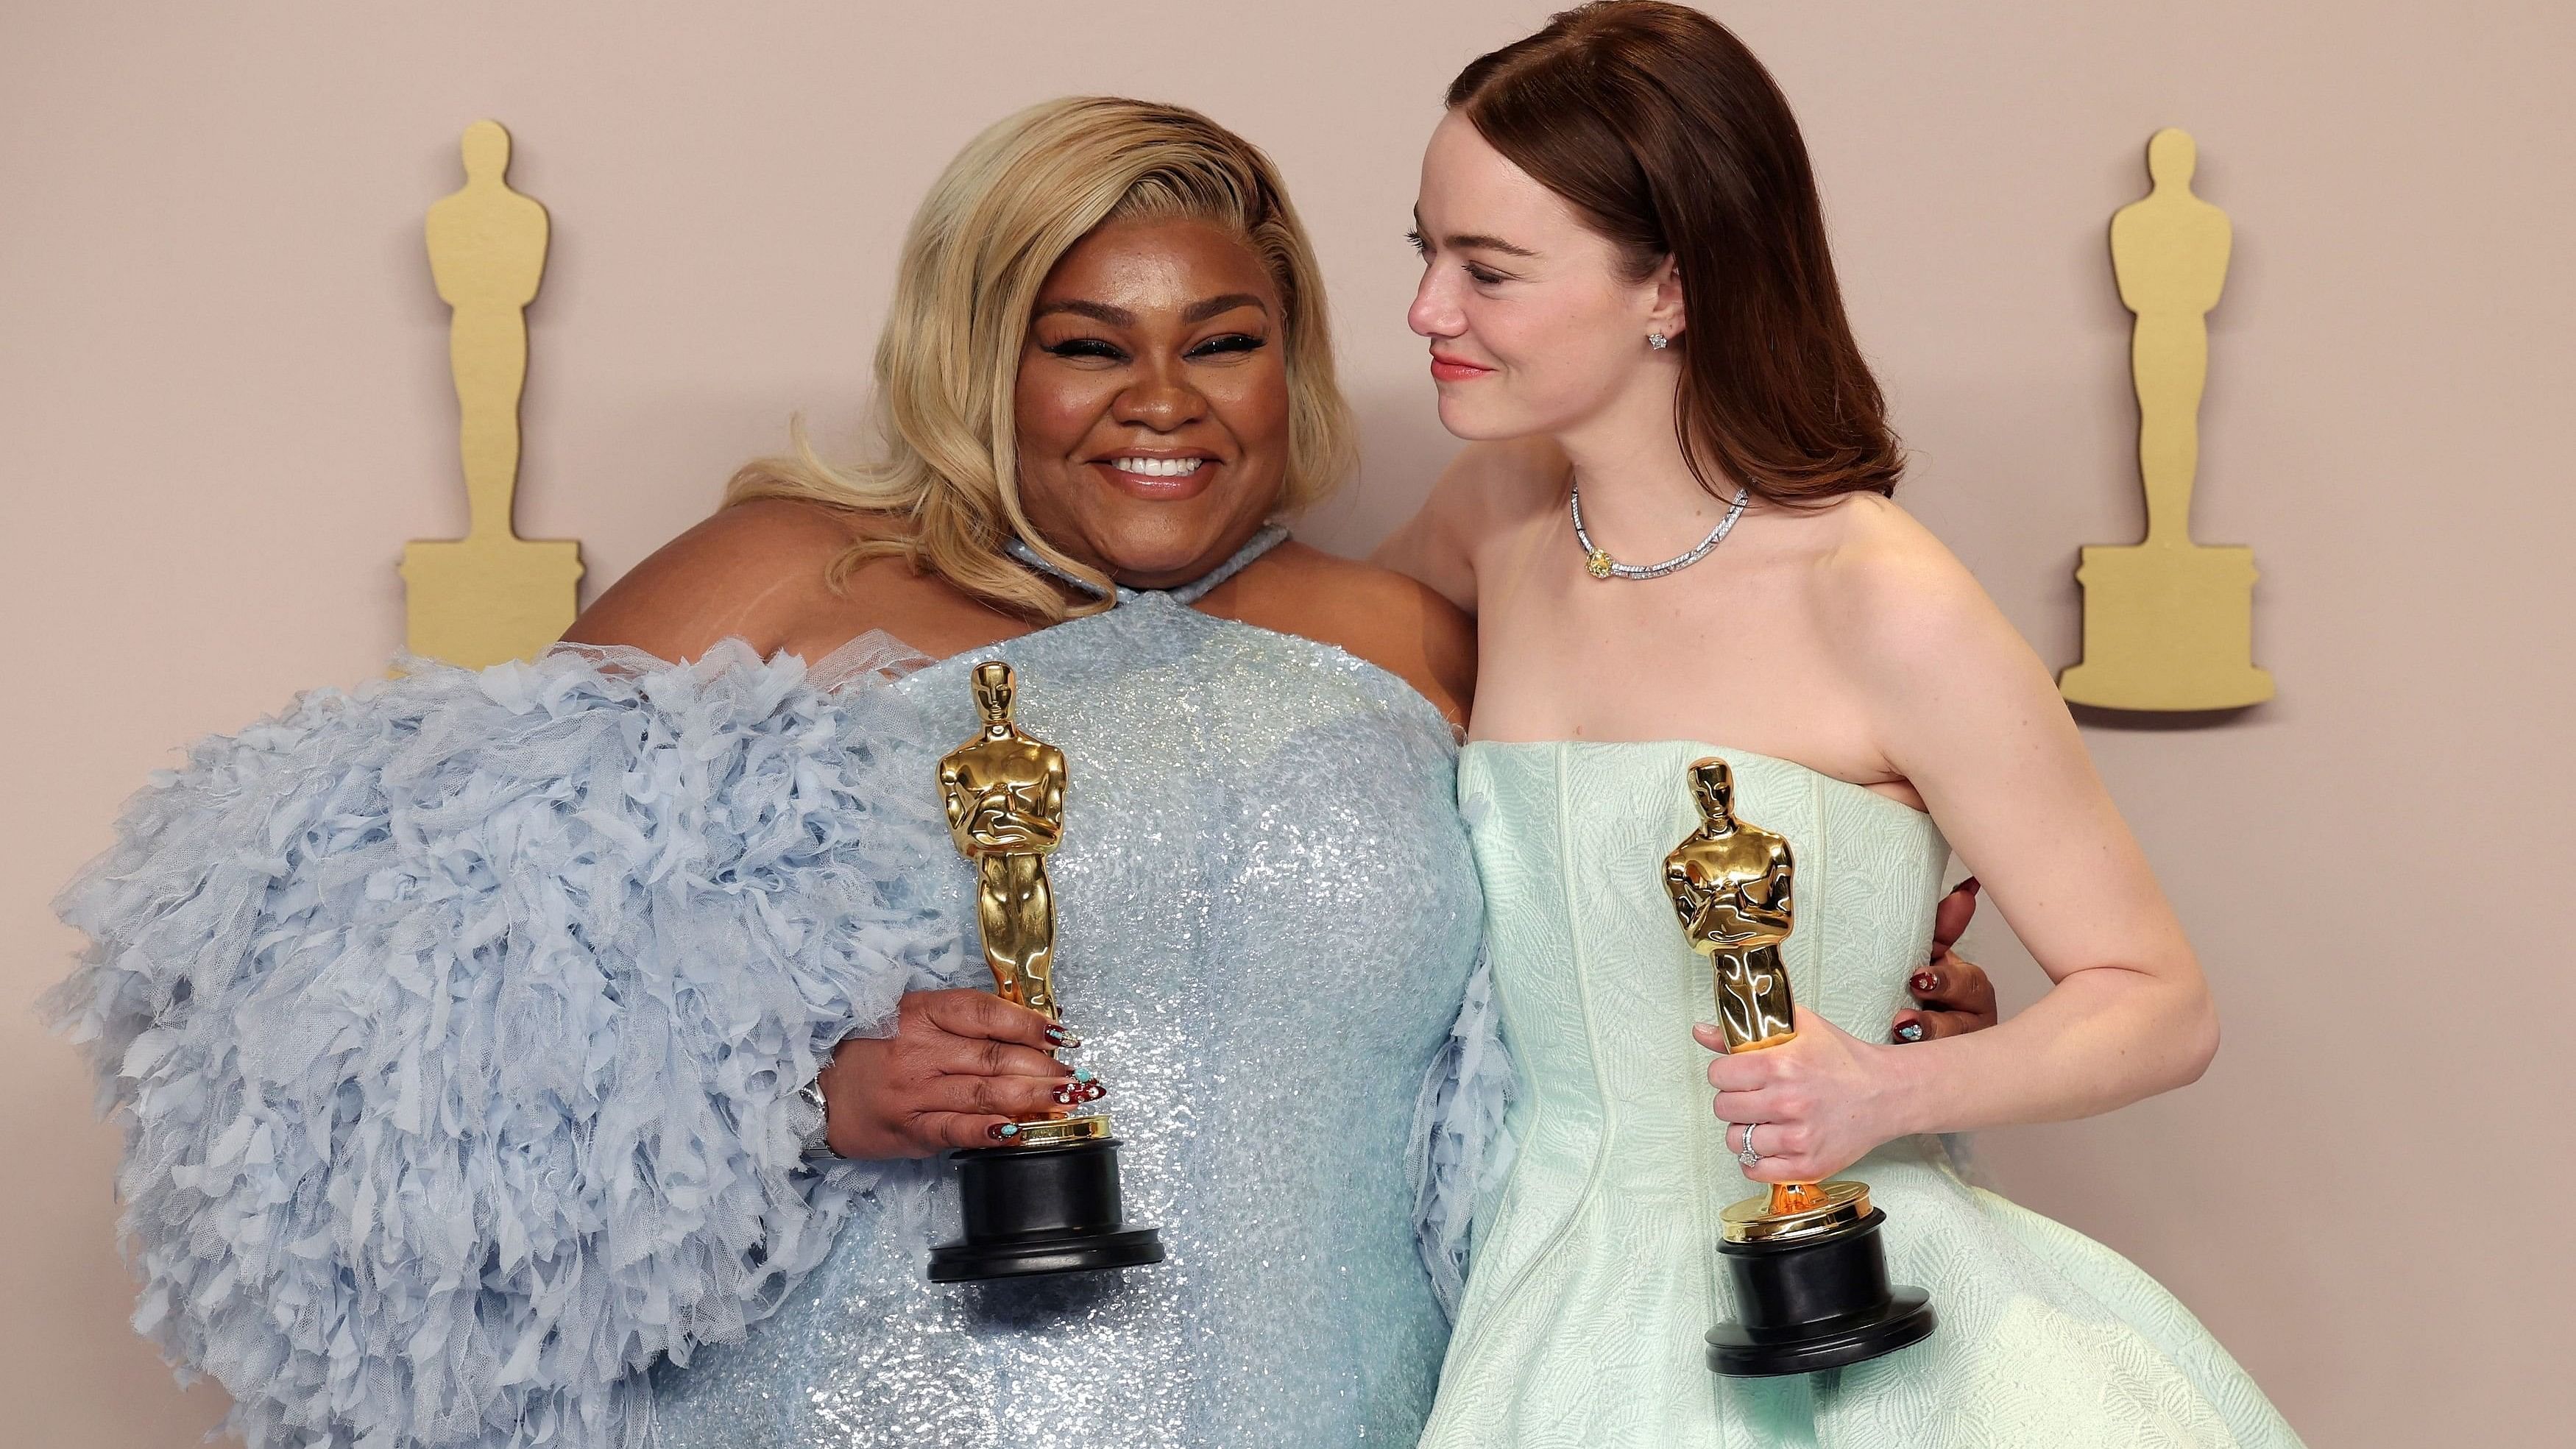 <div class="paragraphs"><p>A photo of Emma Stone and Da'Vine Joy Randolph holding their Oscars for Best Actress Oscar for "Poor Things" and Best Supporting Actress Oscar for "The Holdovers" respectively, in the Oscars photo room at the 96th Academy Awards in Hollywood, Los Angeles, California.</p></div>